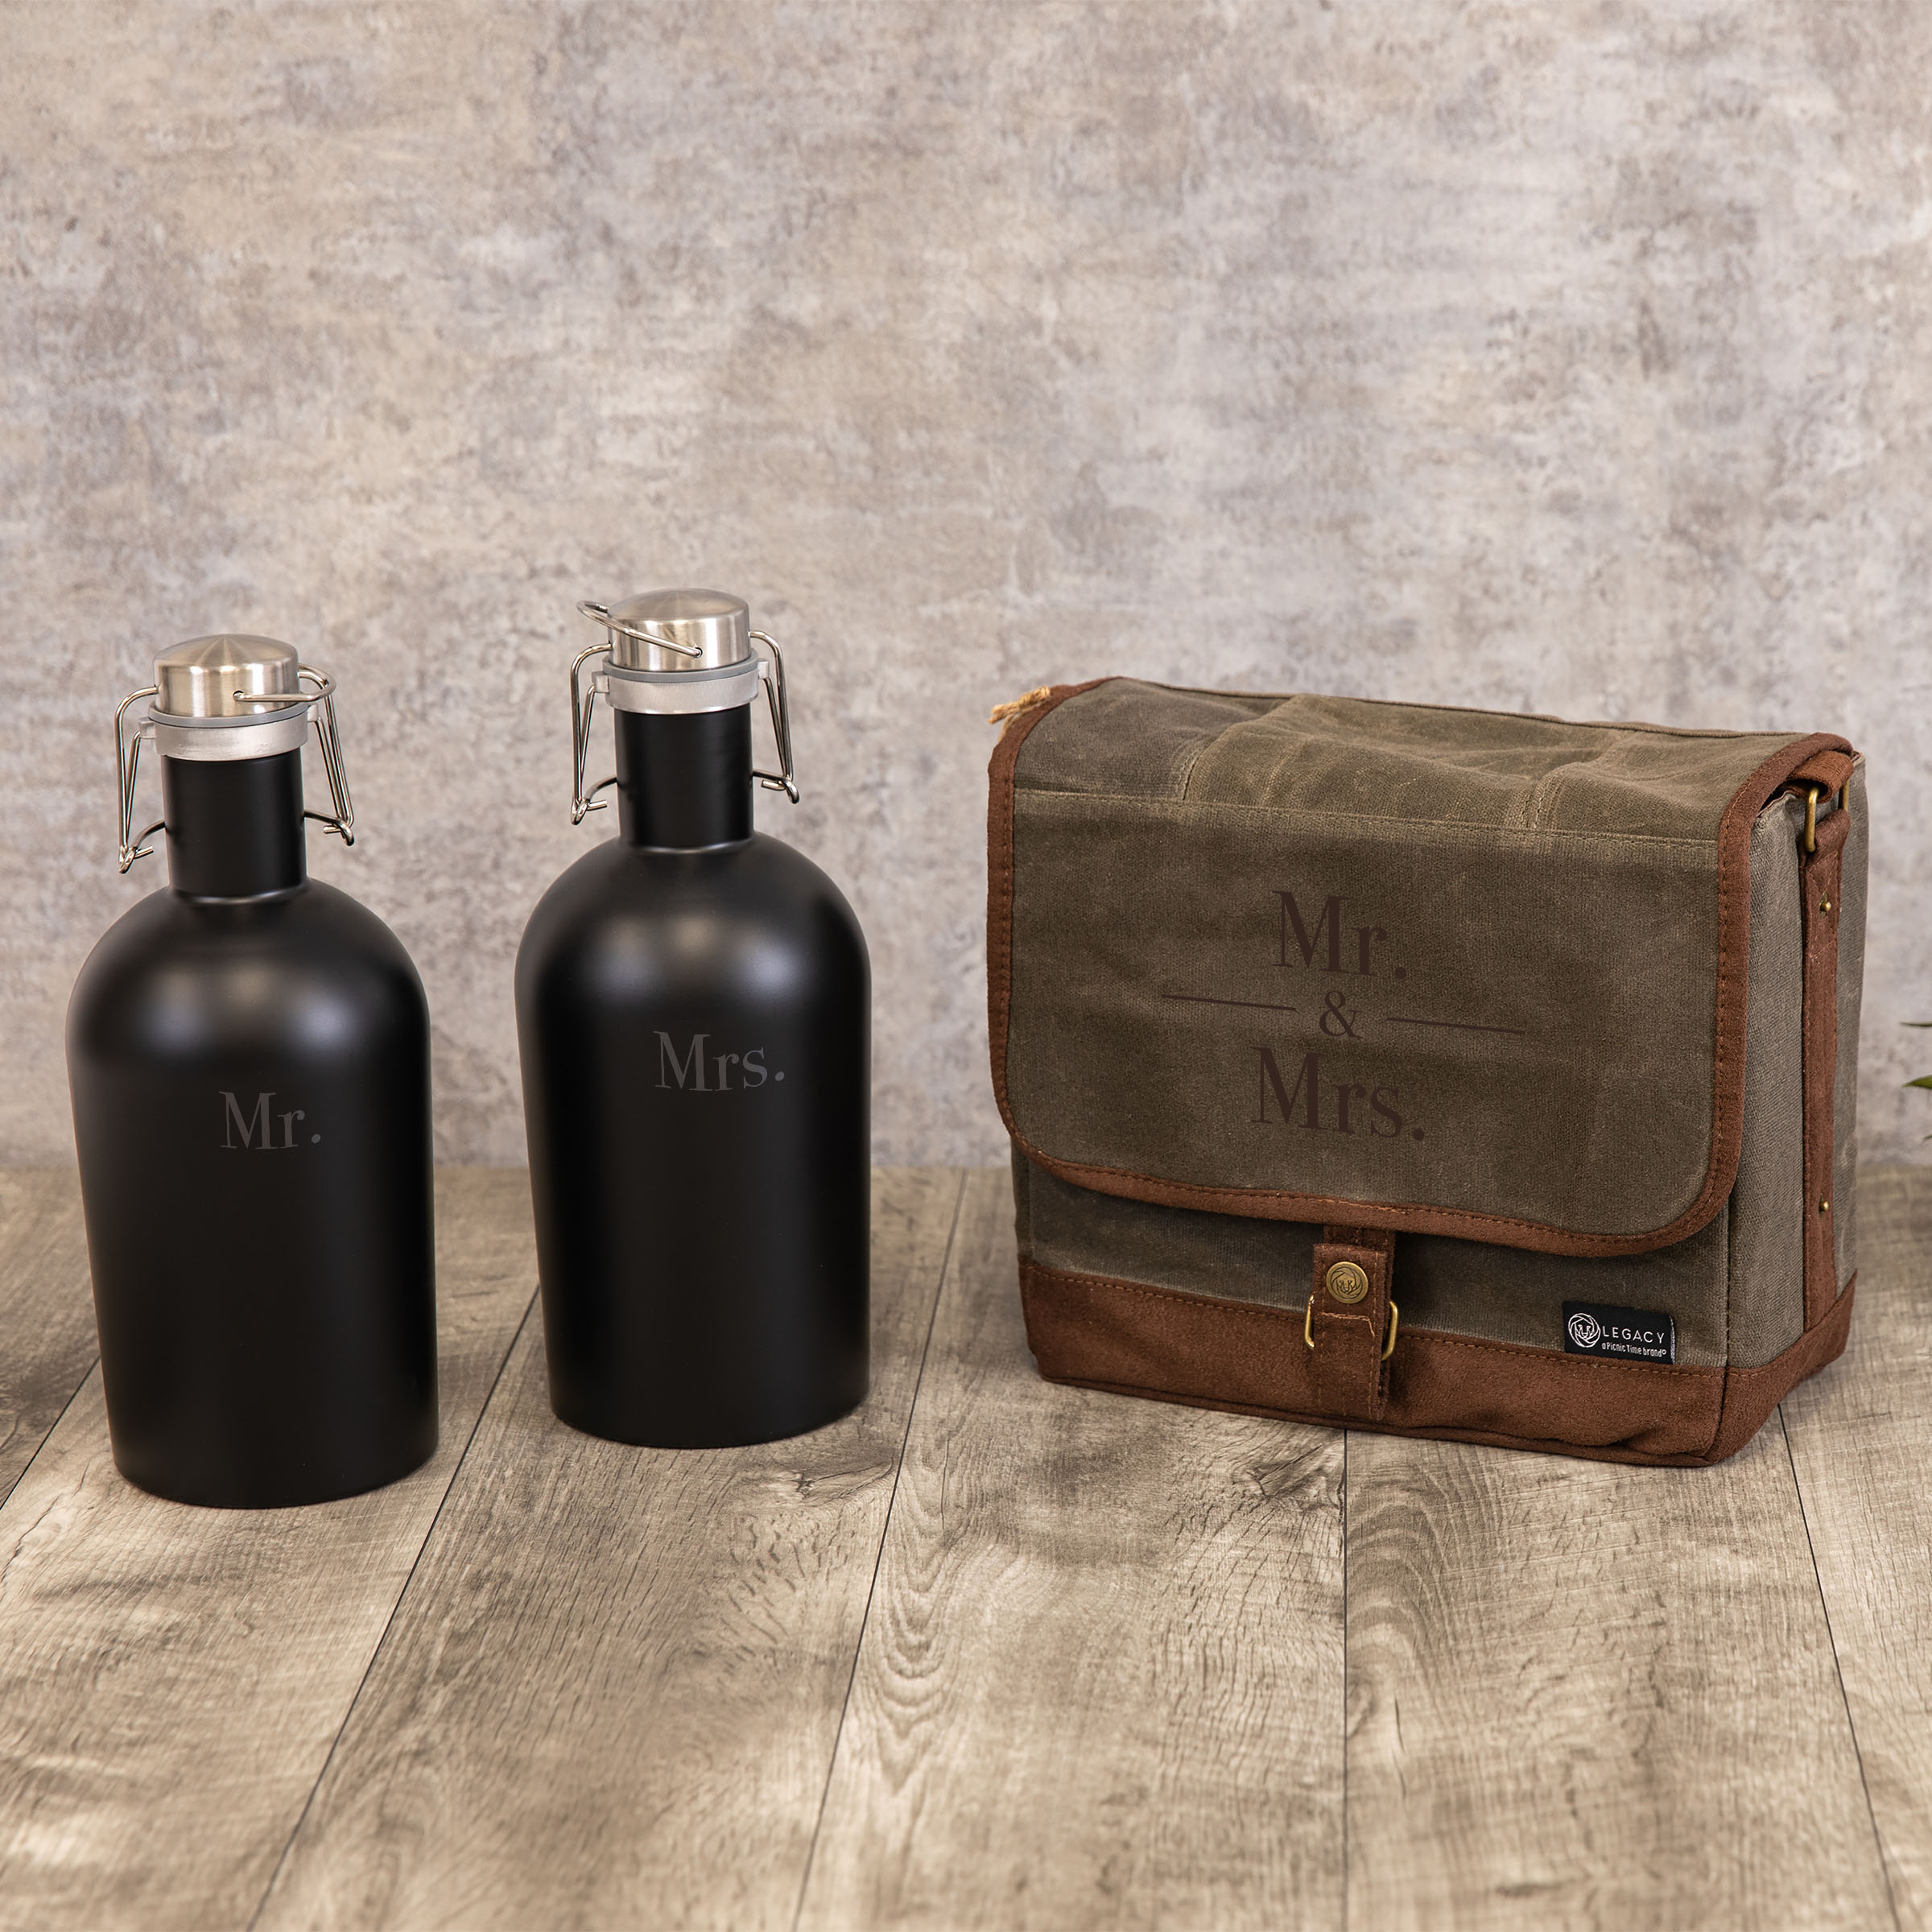 Mr/Mrs - Wedding/Anniversary - Double Growler Tote with Growlers Gift Set